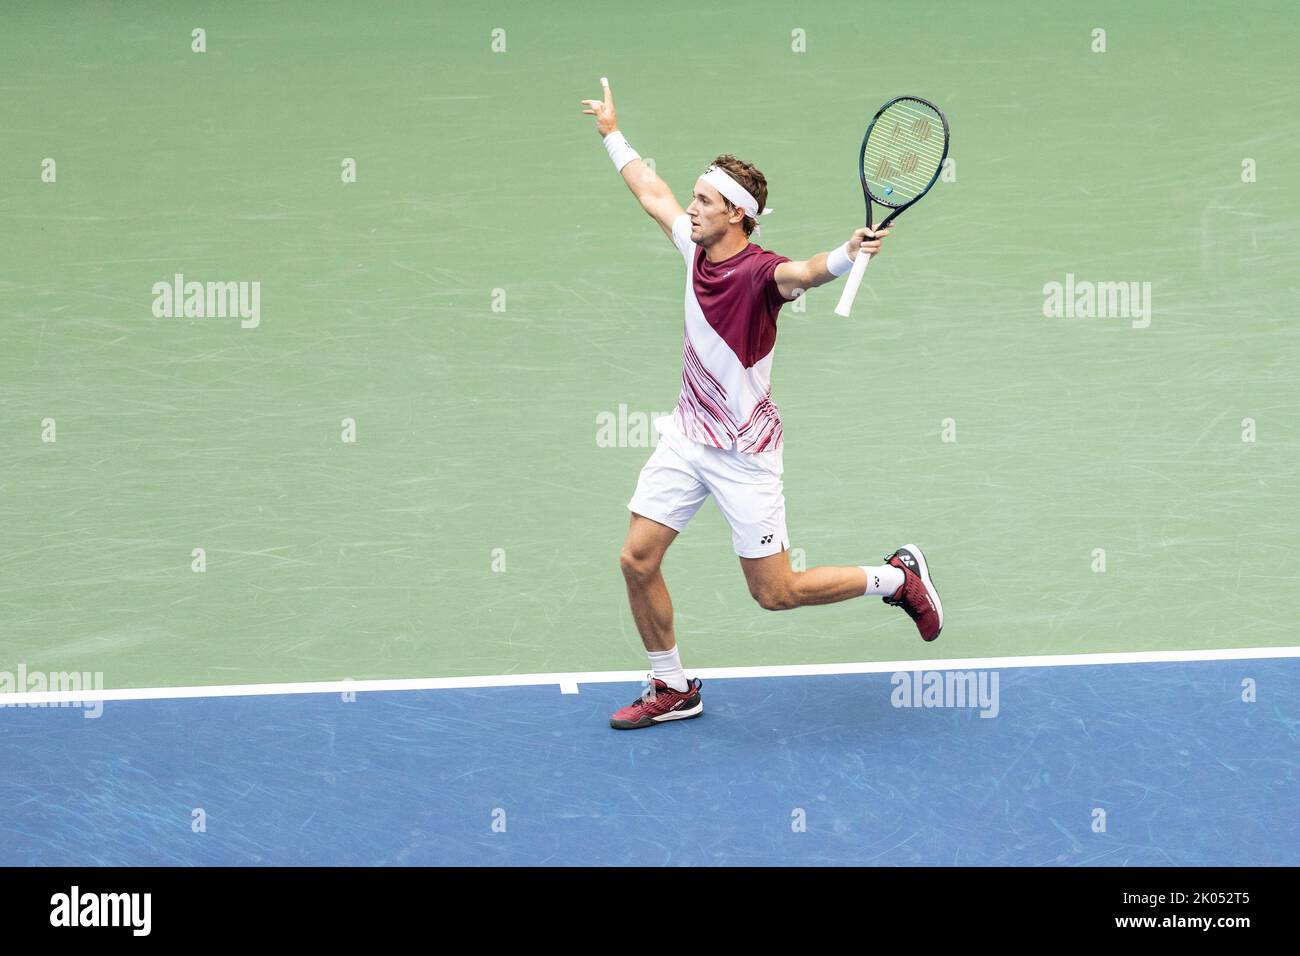 New York, USA. 09th Sep, 2022. Casper Ruud of Norway reacts during semifinal of US Open Championships against Karen Khachanov at USTA Billie Jean King National Tennis Center in New York on September 9, 2022. Ruud won in four sets and will play his first ever US Open final. (Photo by Lev Radin/Sipa USA) Credit: Sipa USA/Alamy Live News Stock Photo